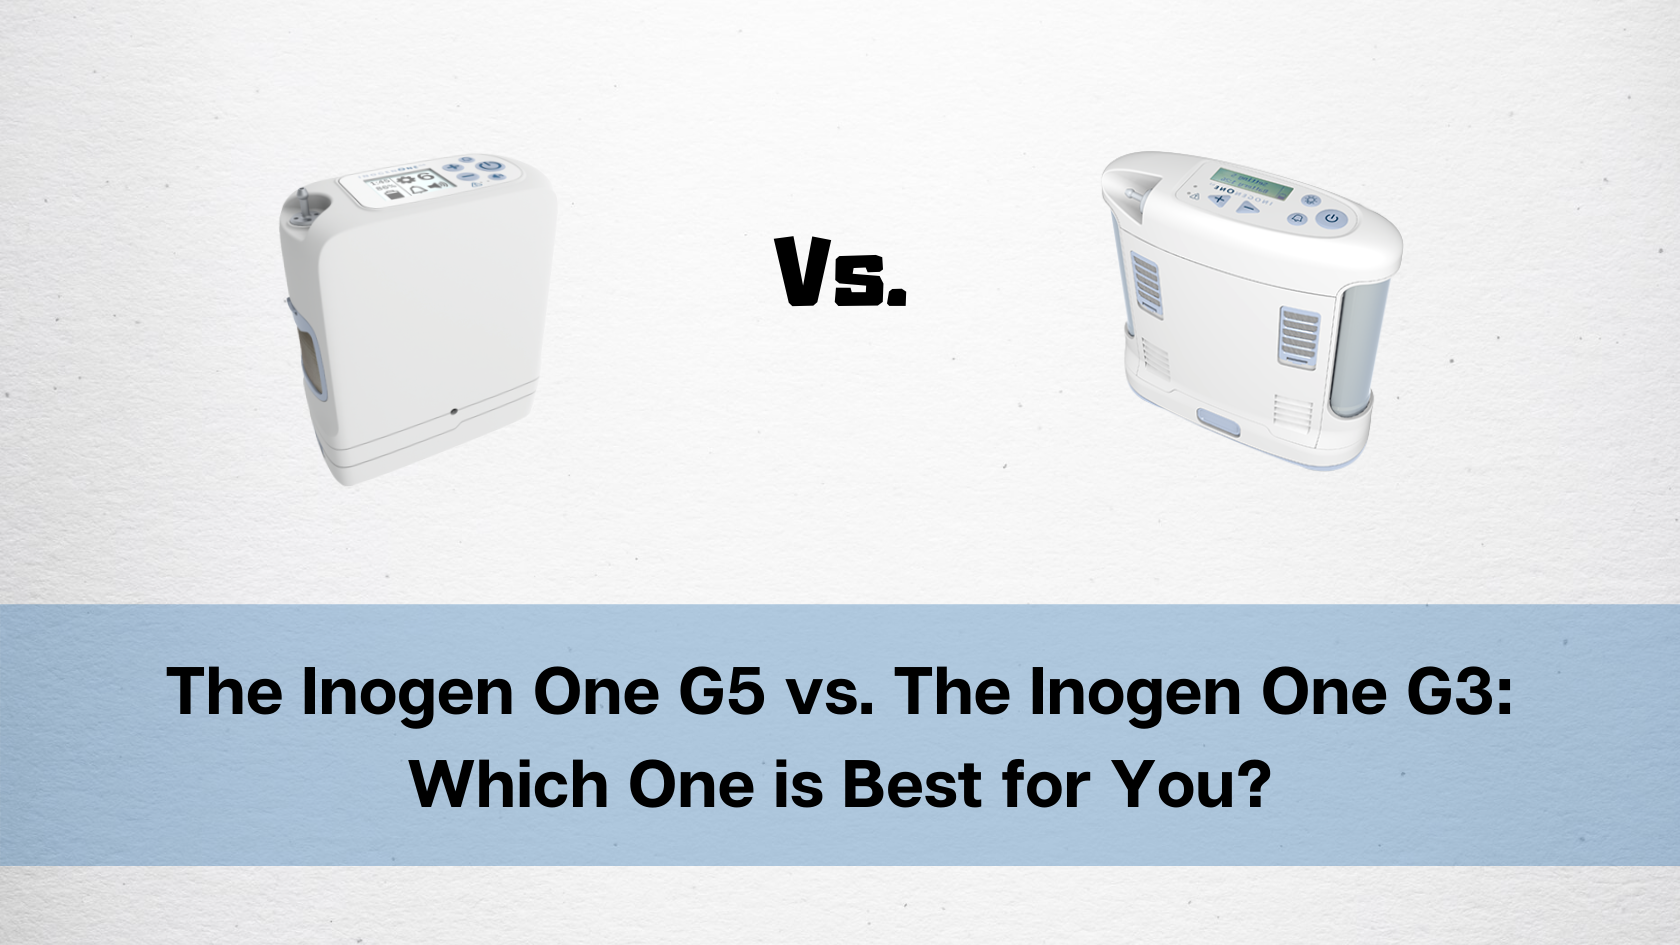 The Inogen One G5 vs. The Inogen One G3: Which One is Best for You?